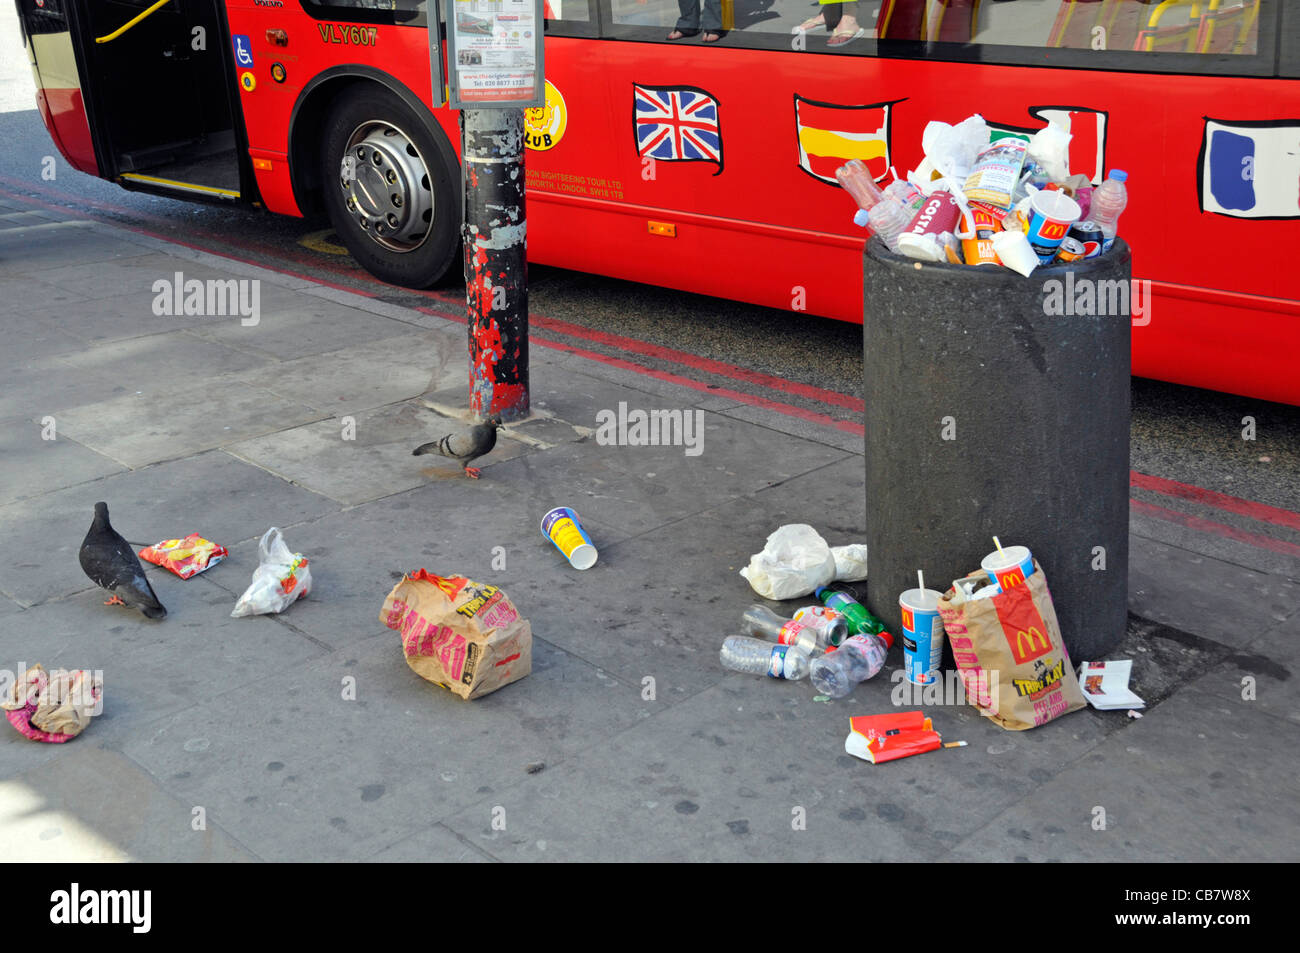 Waste management required to littering scene at street refuse bin full of rubbish garbage litter & trash spilling on pavement beside London tour bus Stock Photo